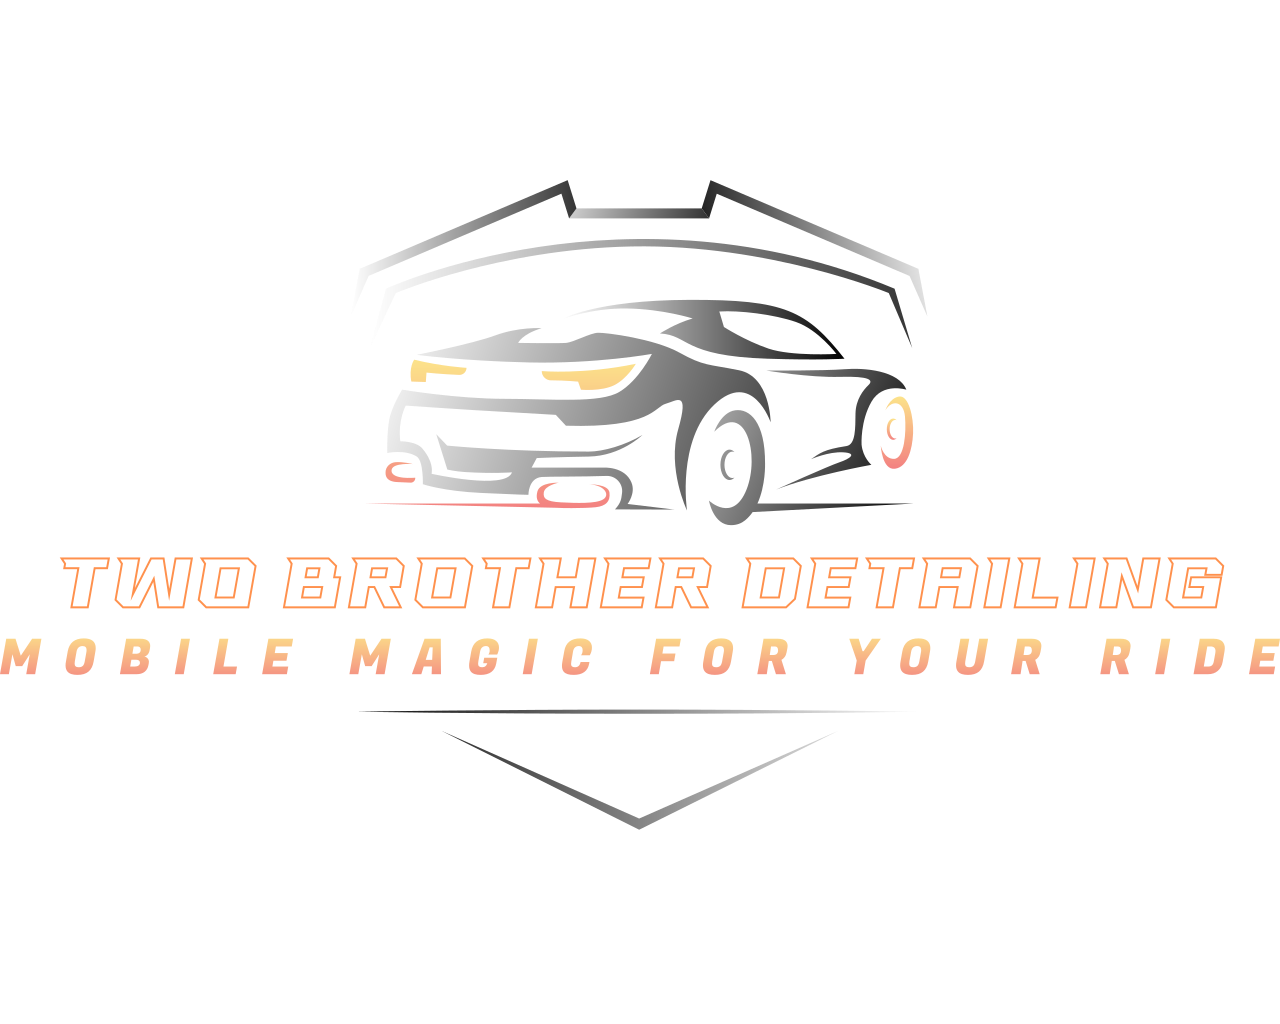 Two Brother Detailing's logo